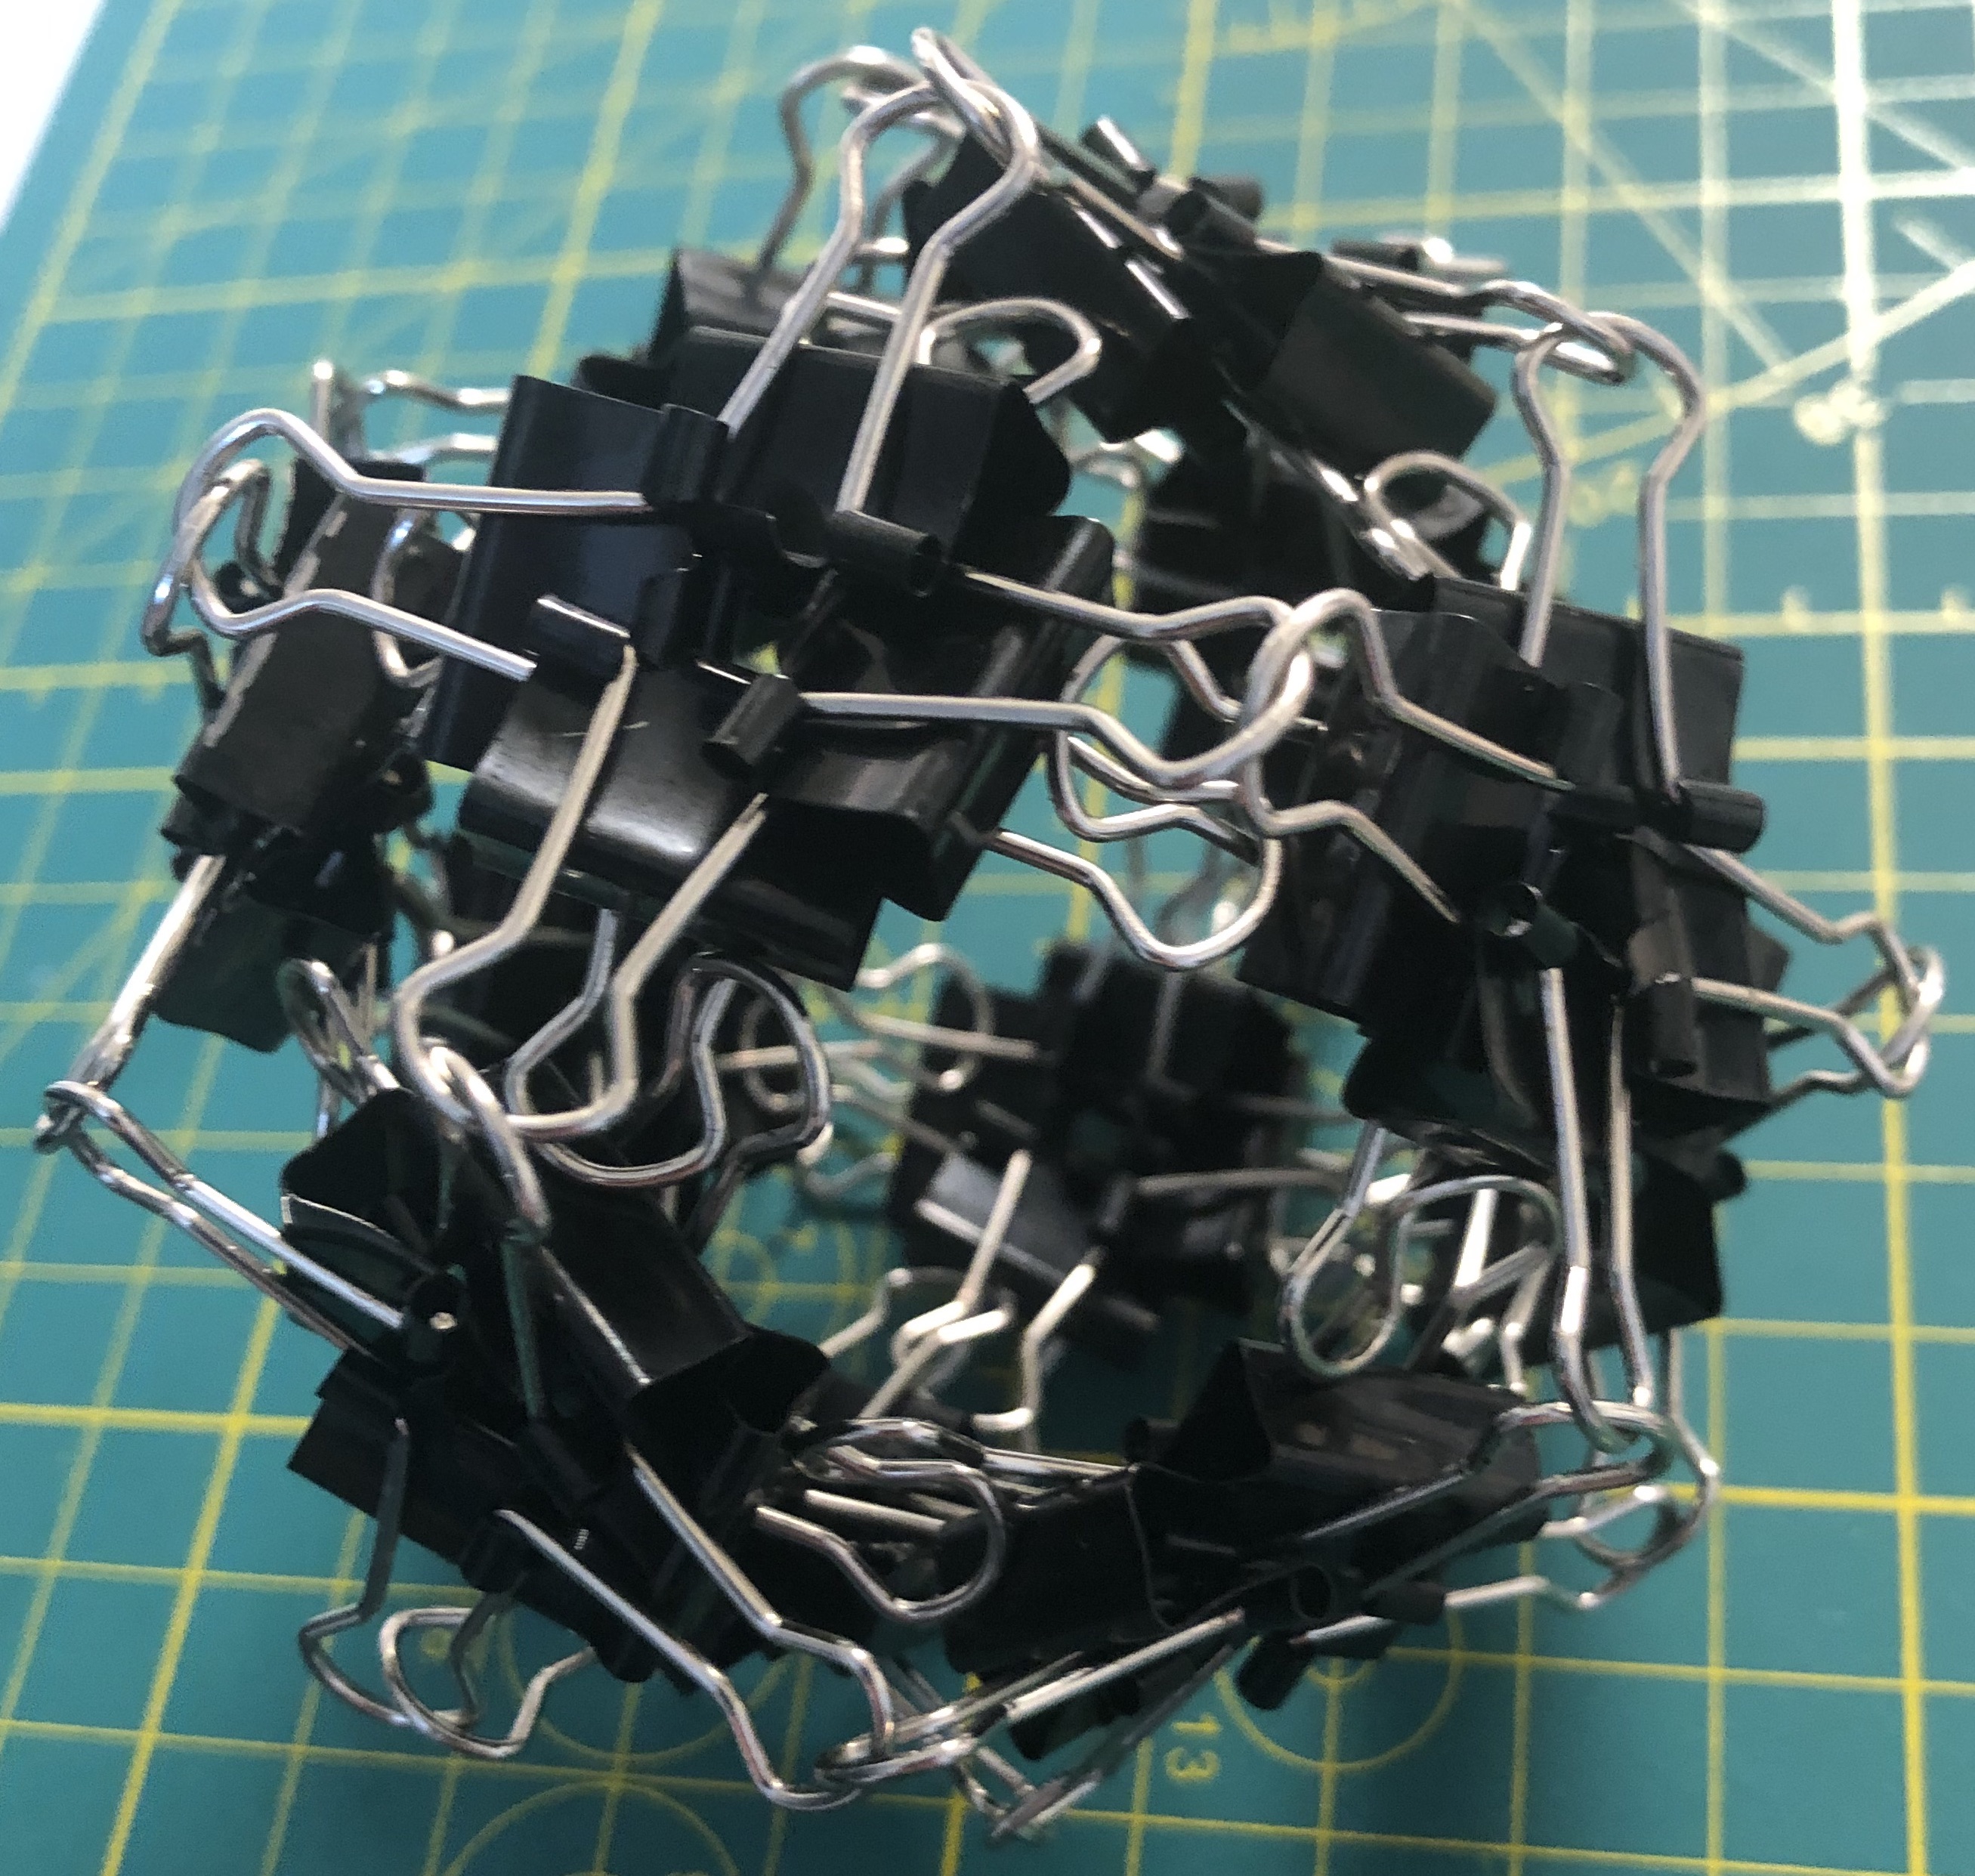 48 clips forming 24 W-edges forming cuboctahedron